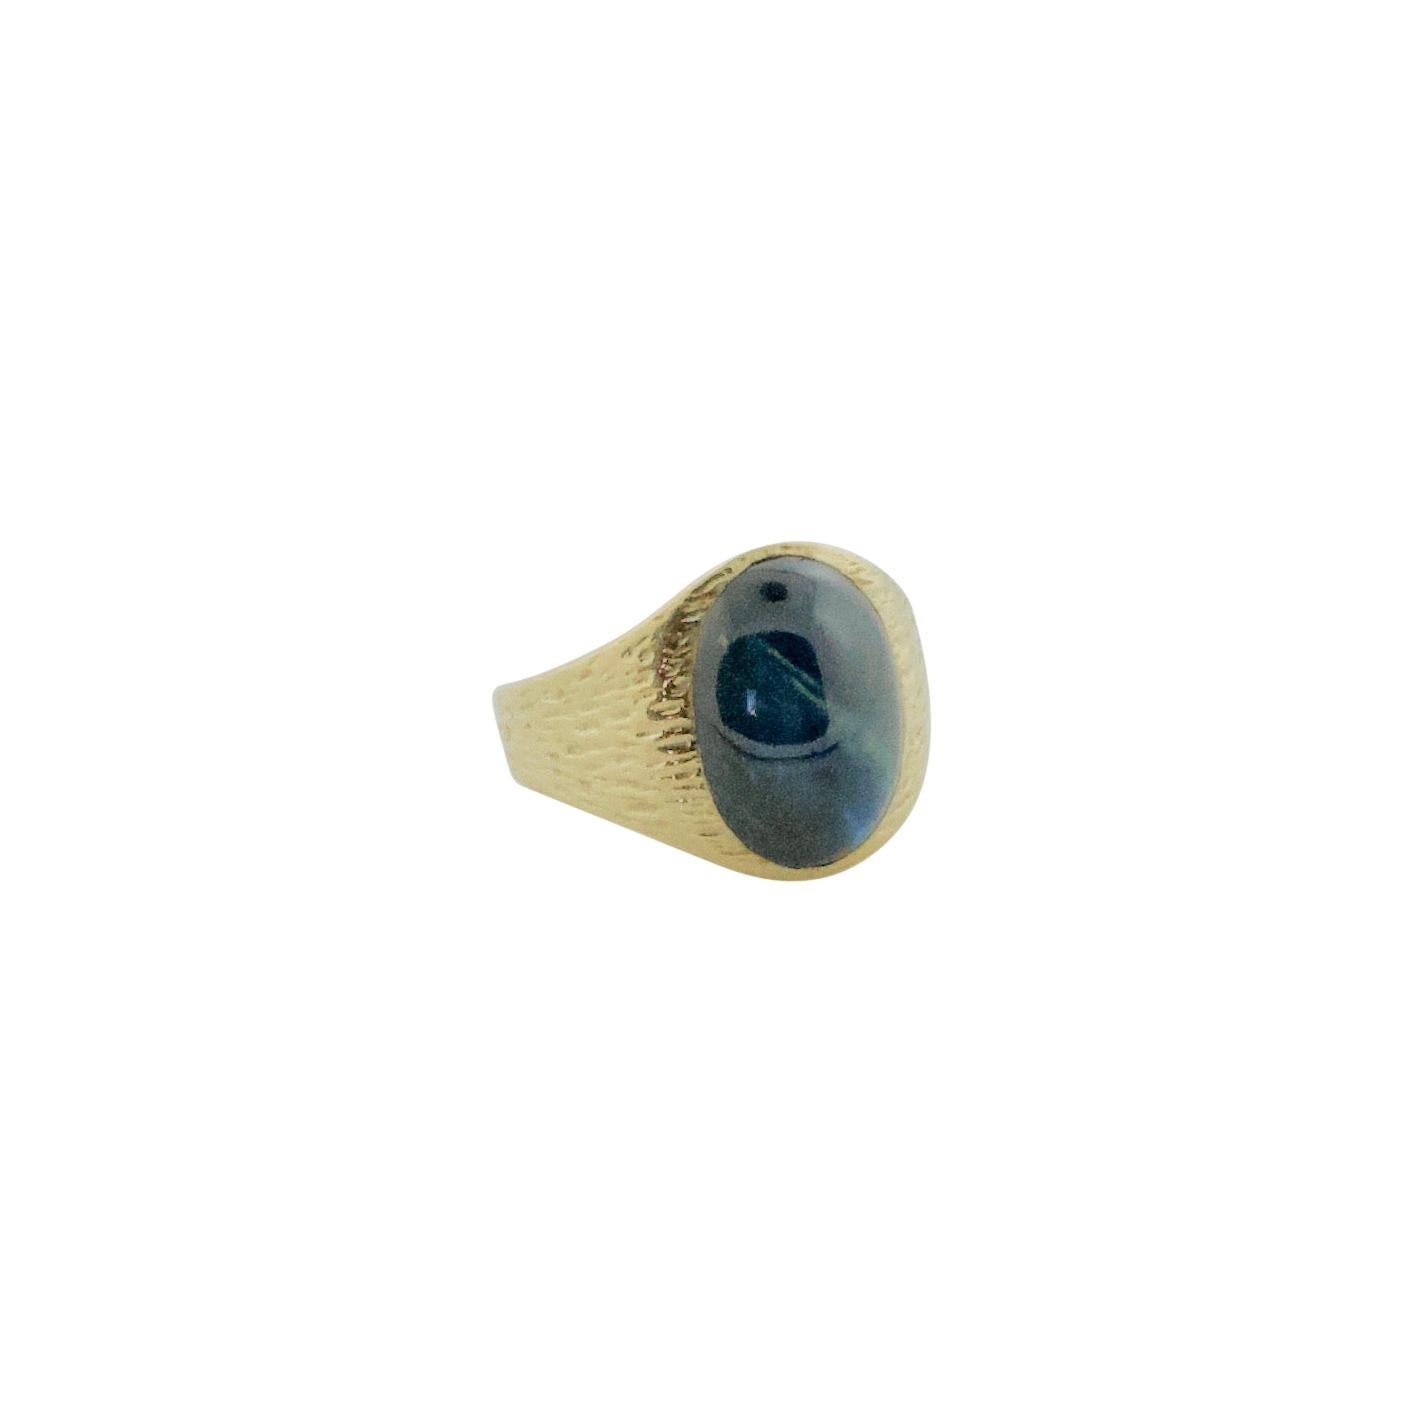 Cabochon Saphir Pinky Ring mit Rinde Finish in Gelbgold